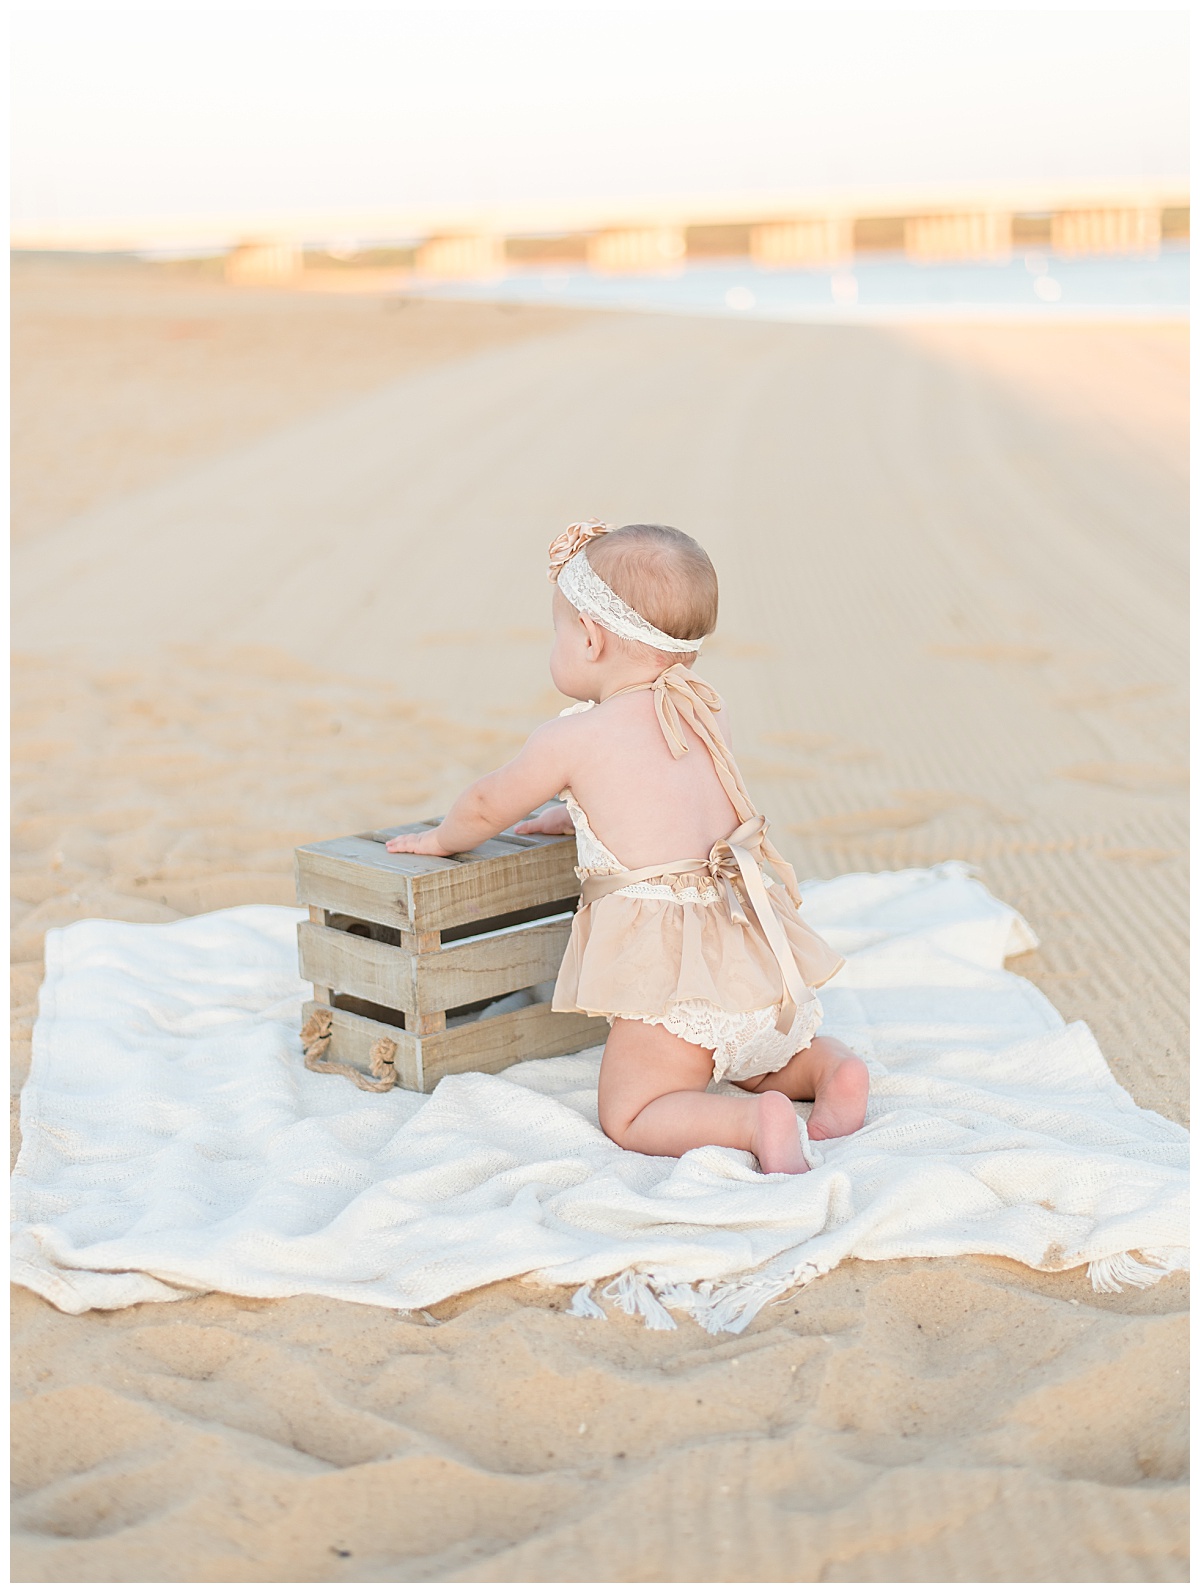 Baby girl pulling herself up on a crate at the beach for her cake smash portraits in North Dallas by Lindsey Dutton Photography, a Dallas Cake Smash Photographer. 